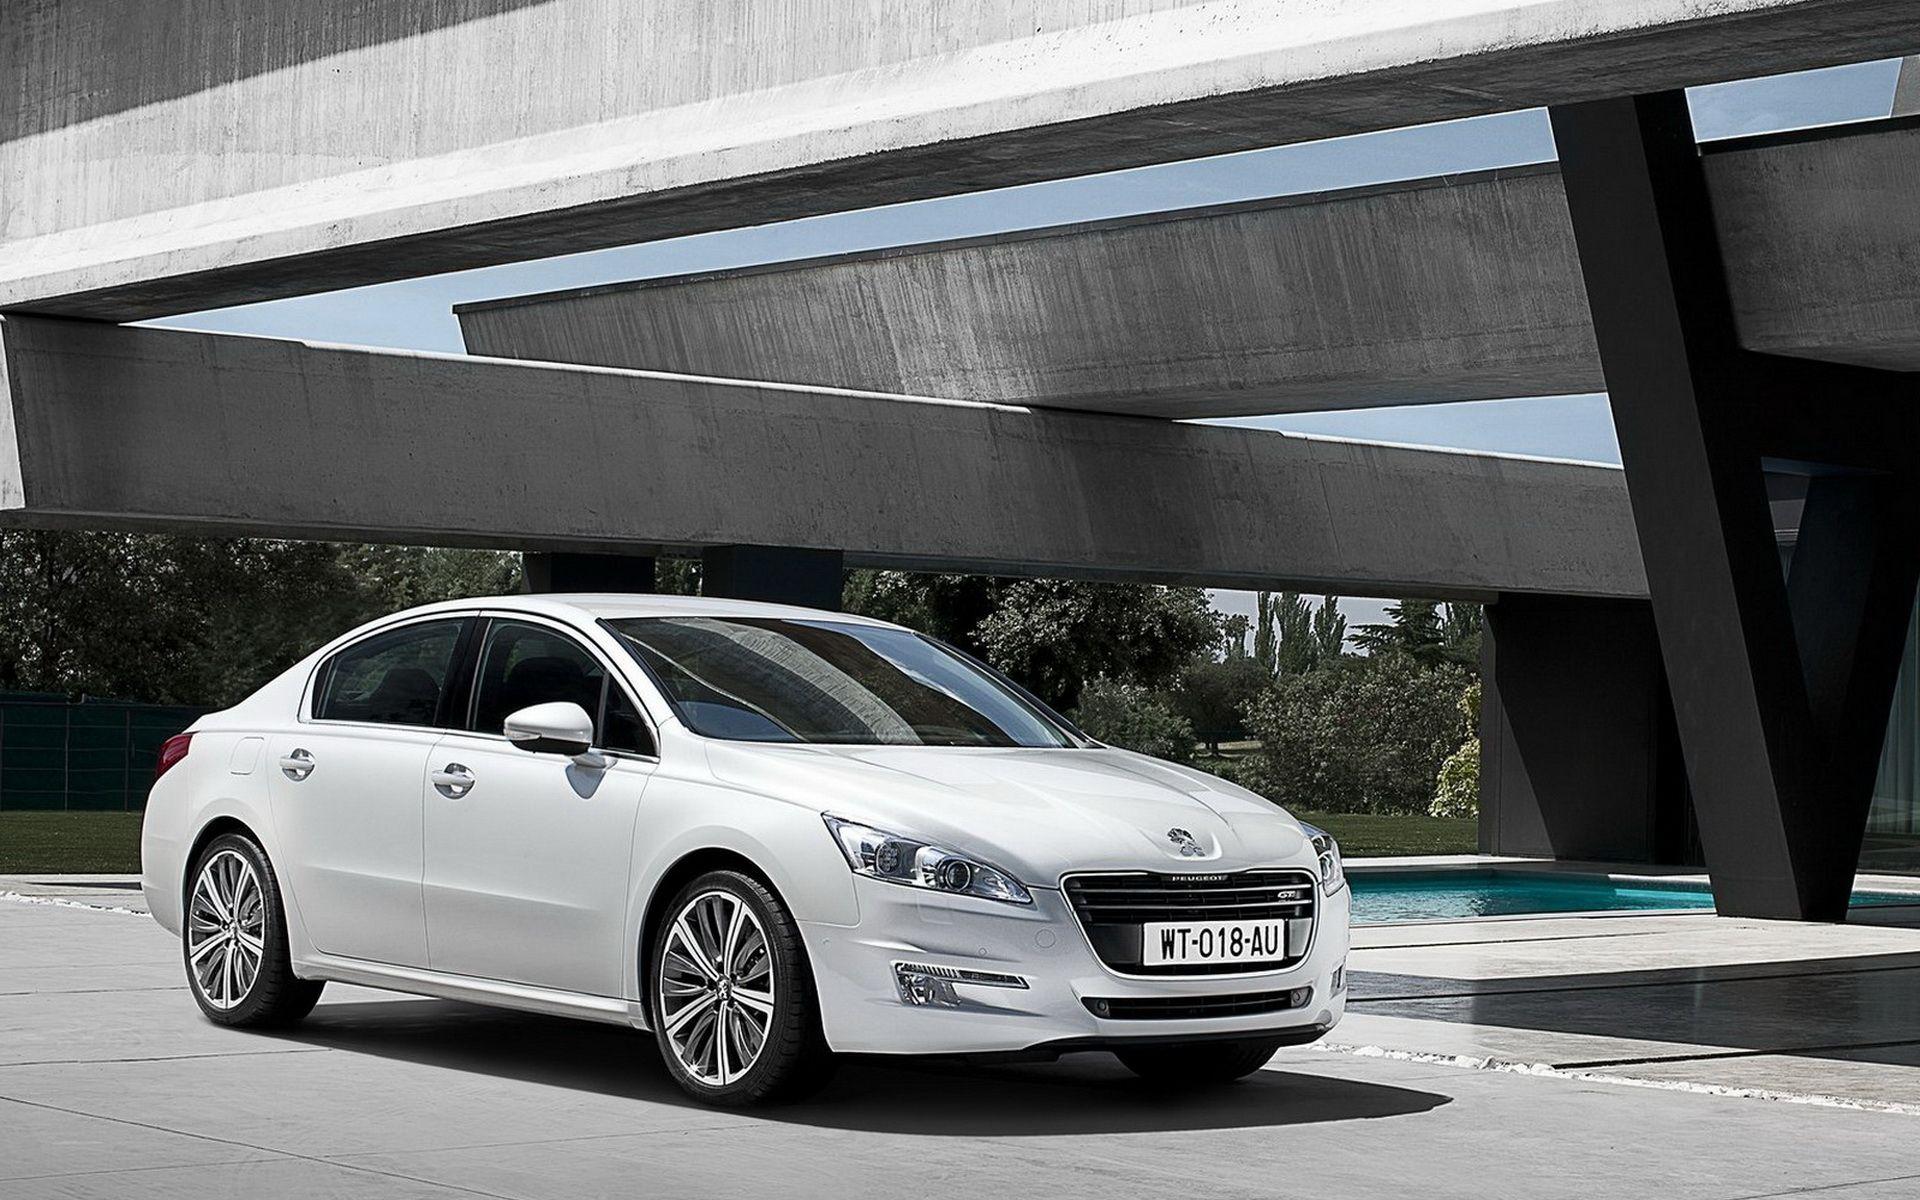 Peugeot 508 GT Wallpaper And Image, Picture, Photo